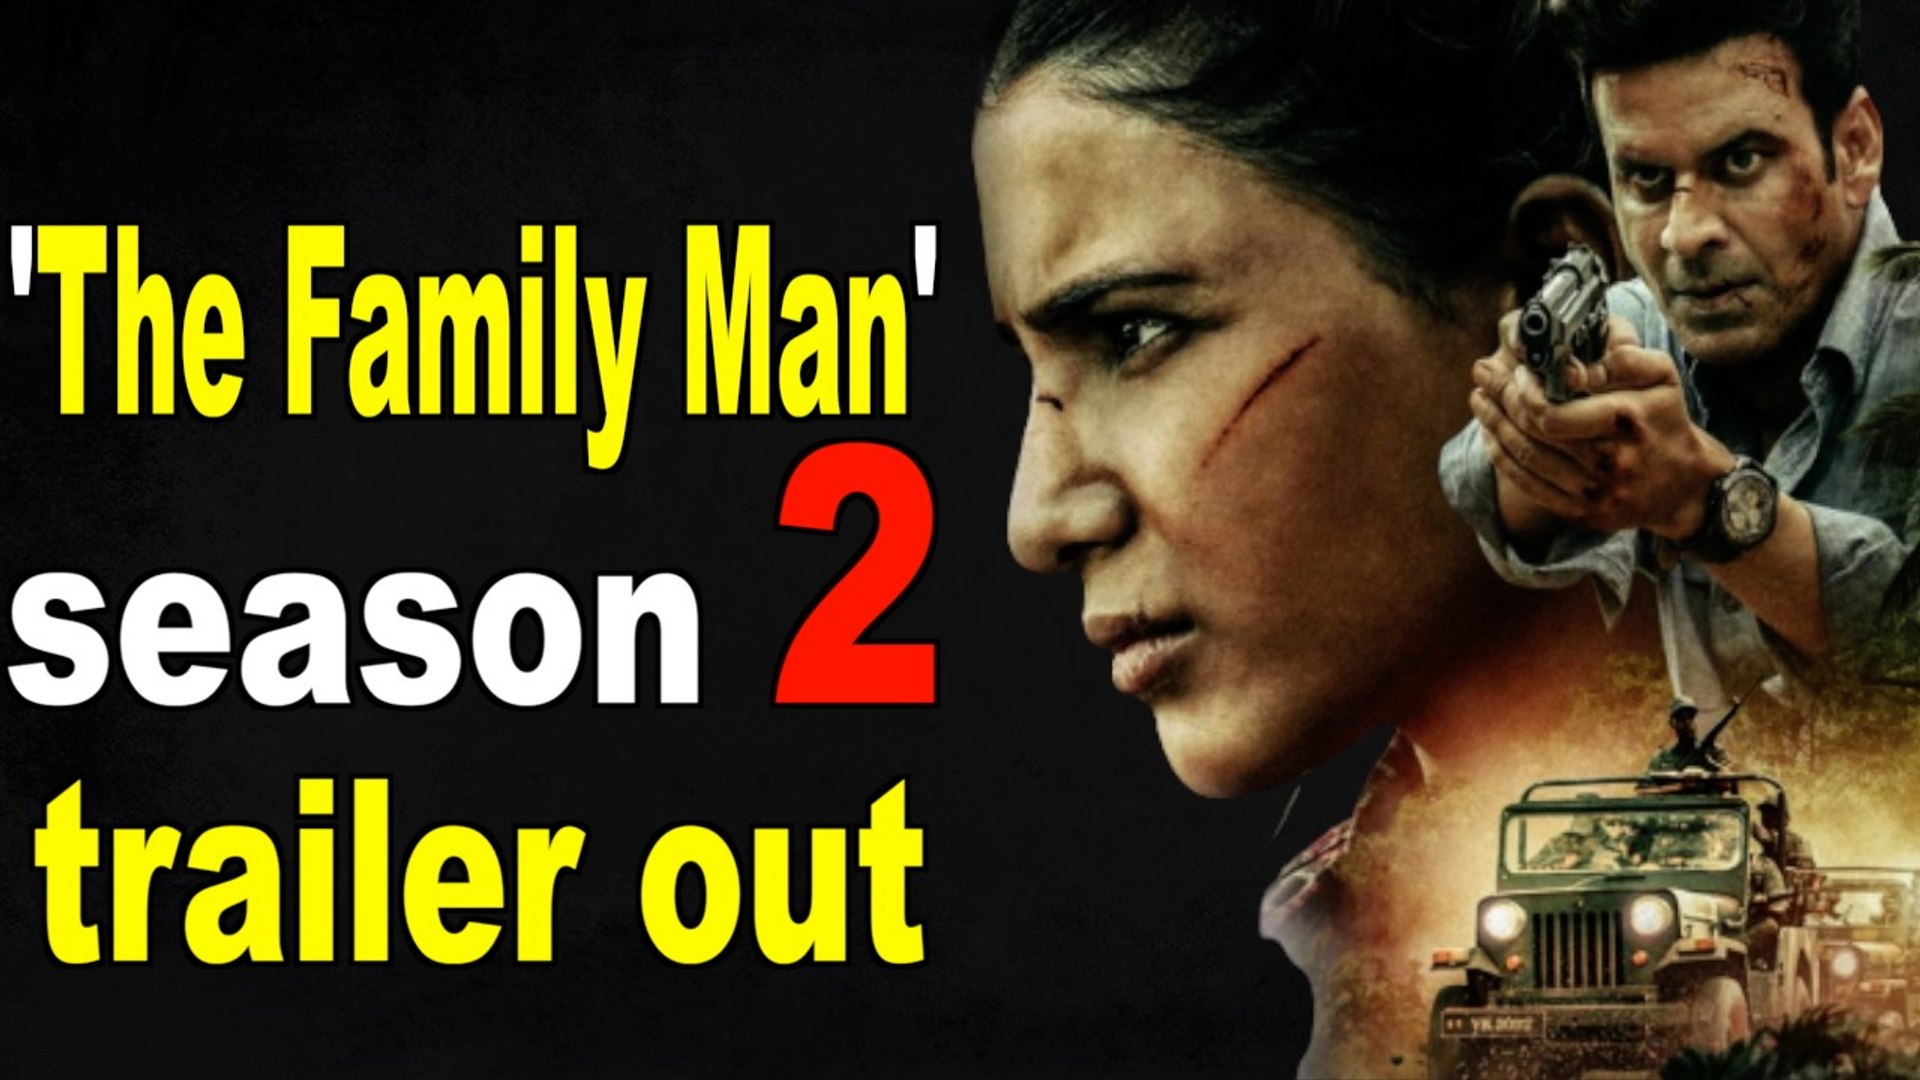 The Family Man' season 2 trailer out - video Dailymotion